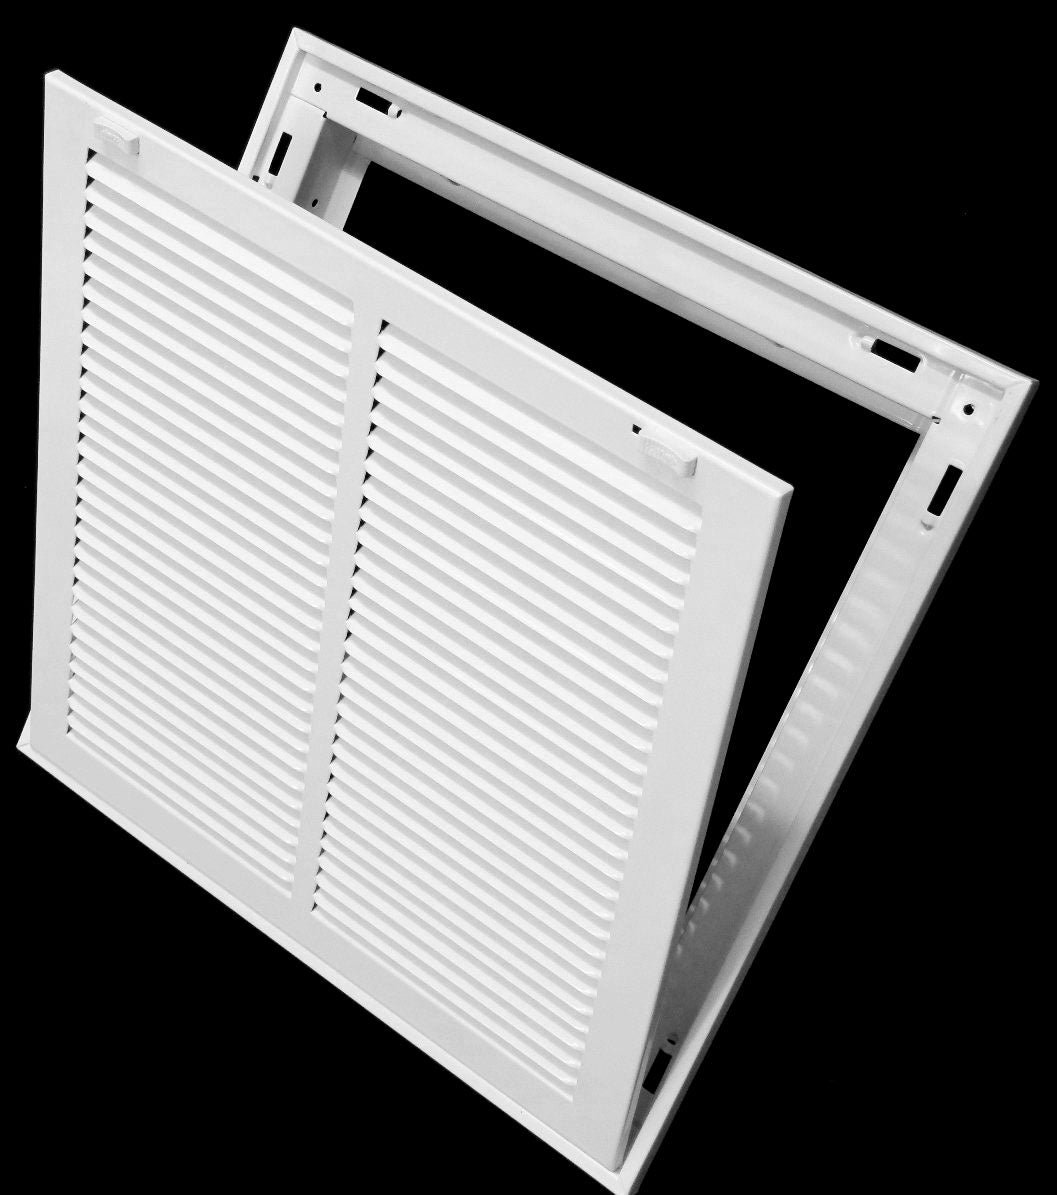 14&quot; X 14&quot; Steel Return Air Filter Grille for 1&quot; Filter - Removable Frame - [Outer Dimensions: 16 5/8&quot; X 16 5/8&quot;]